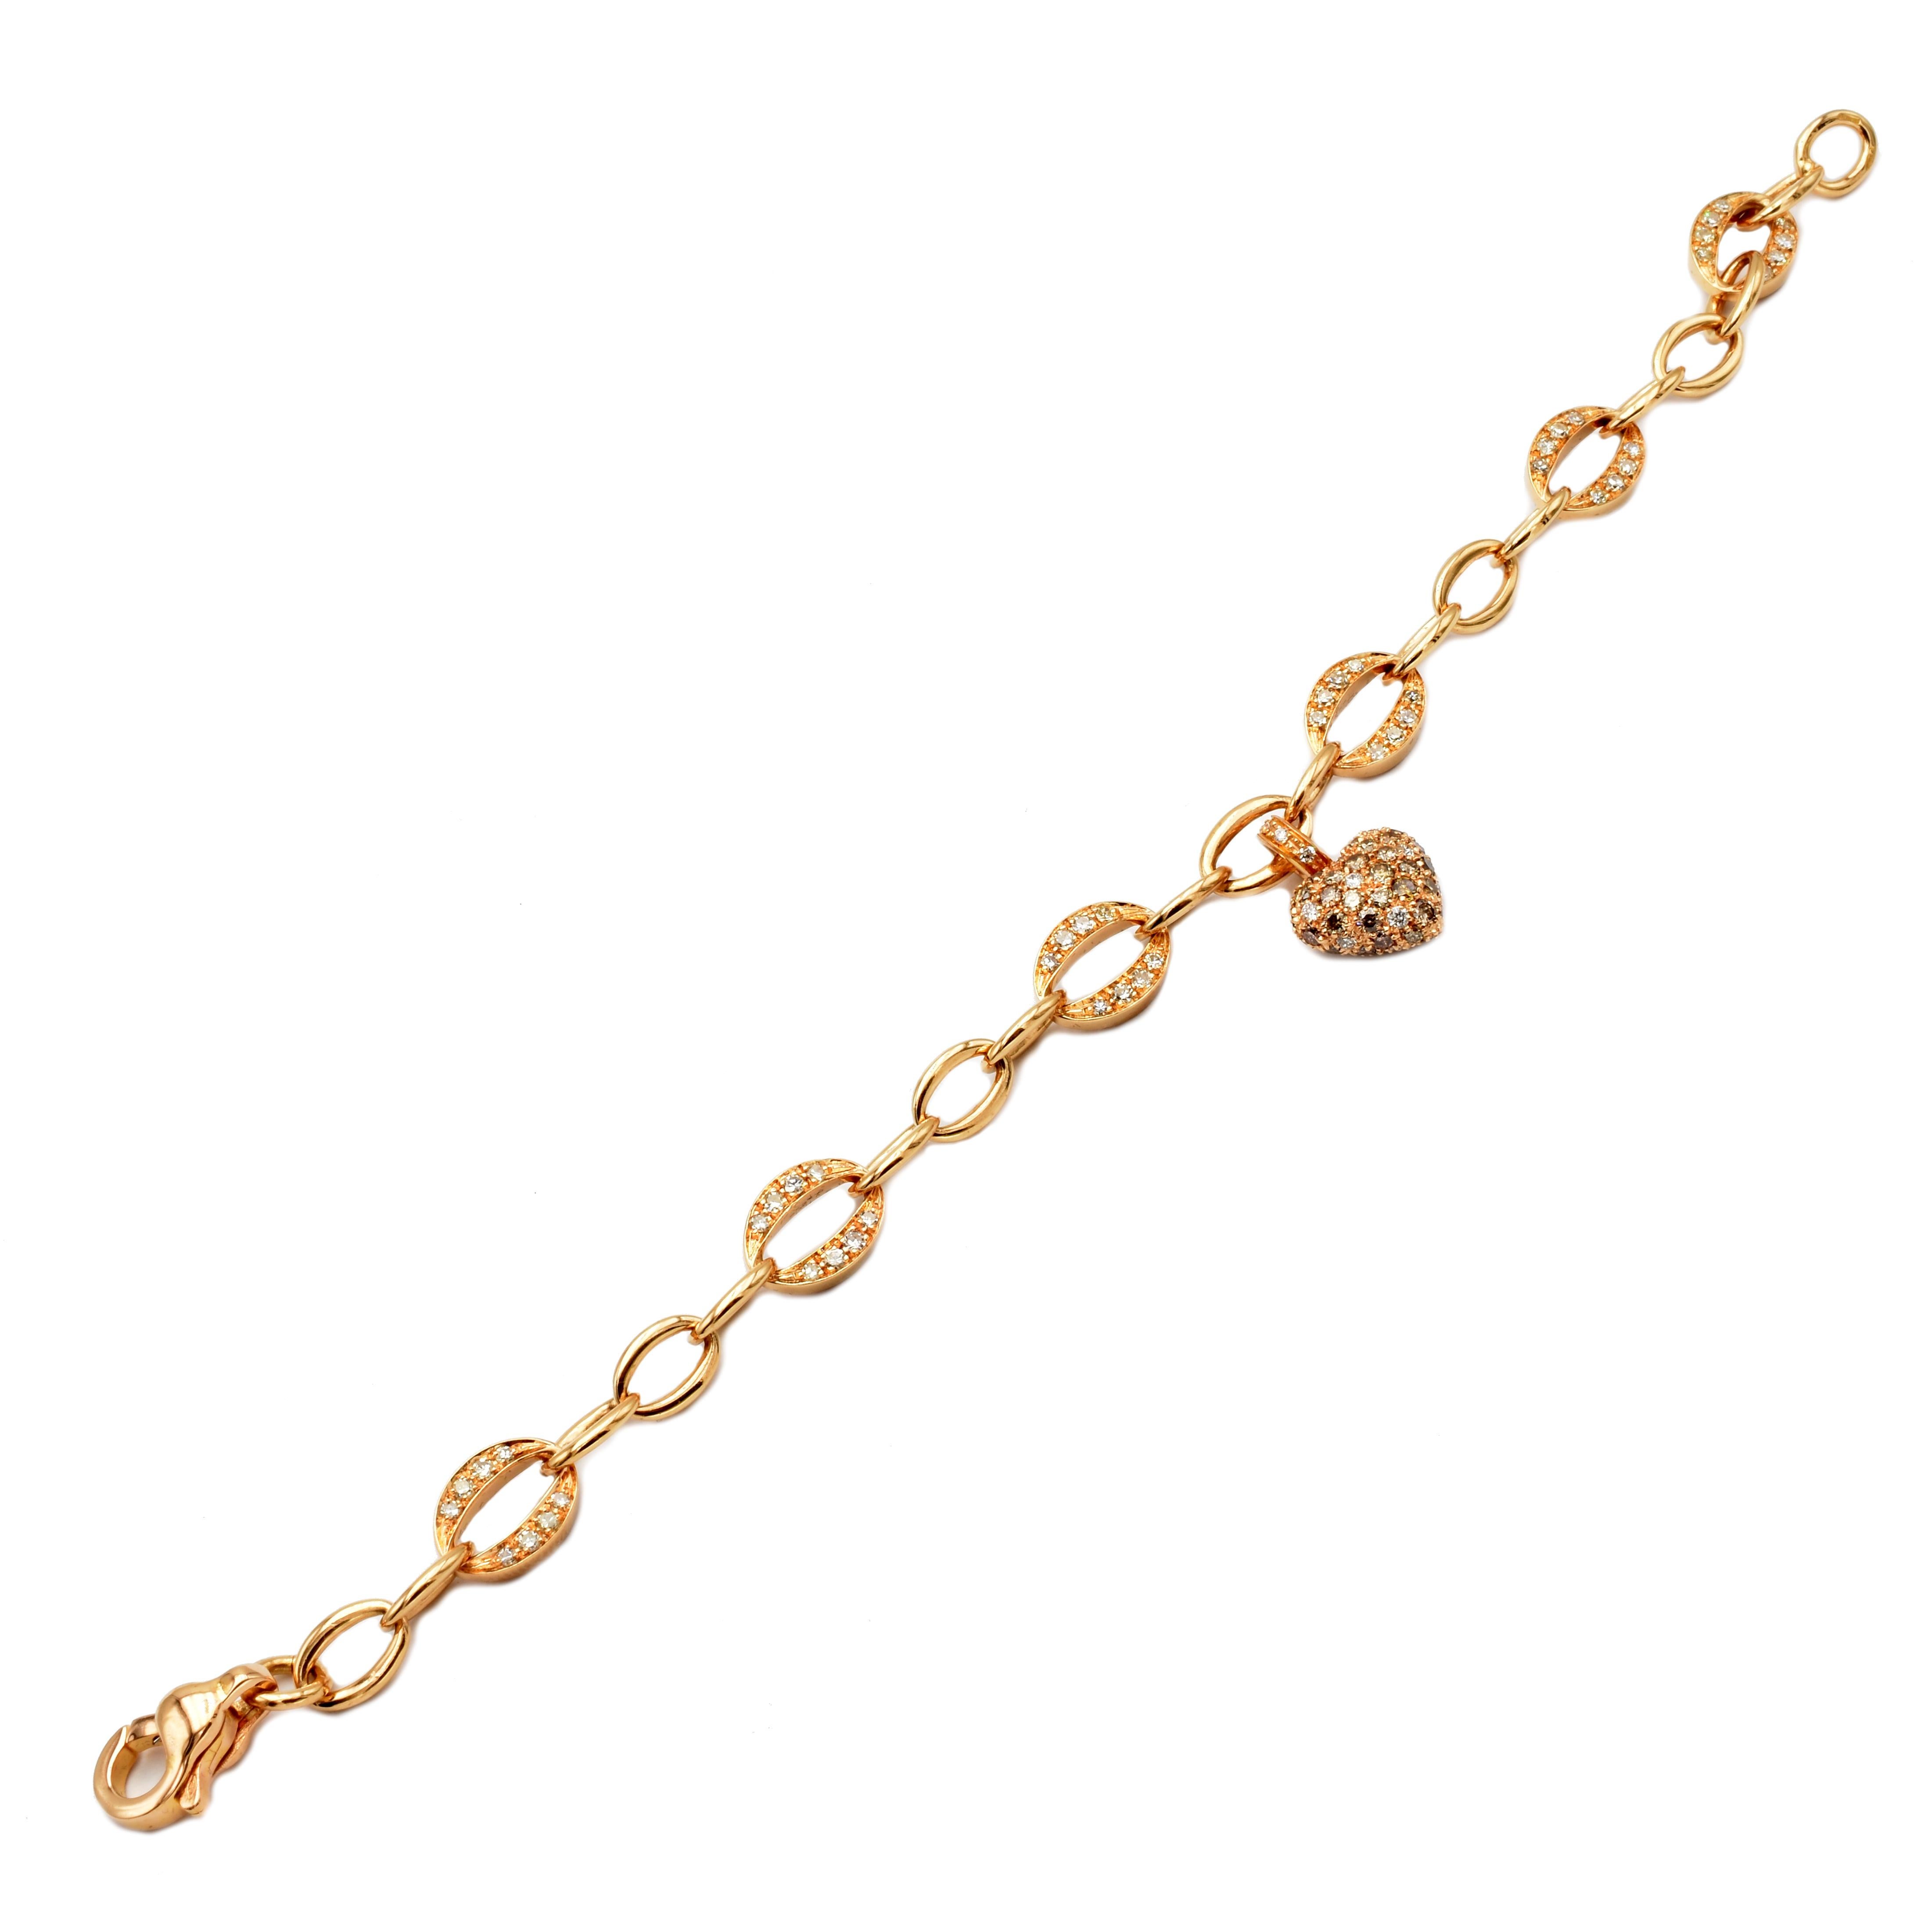 18 Kt Rose Gold Charm Bracelet with a Hanging Heart Completely set in White and Champagne Diamonds. 
Handmade in Italy in our Atelier in Valenza (AL).
18Kt Gold g 15.70
White Diamonds (G Color Vs Clarity) ct 1.06
Champagne Diamonds ct 1.56
The Heart